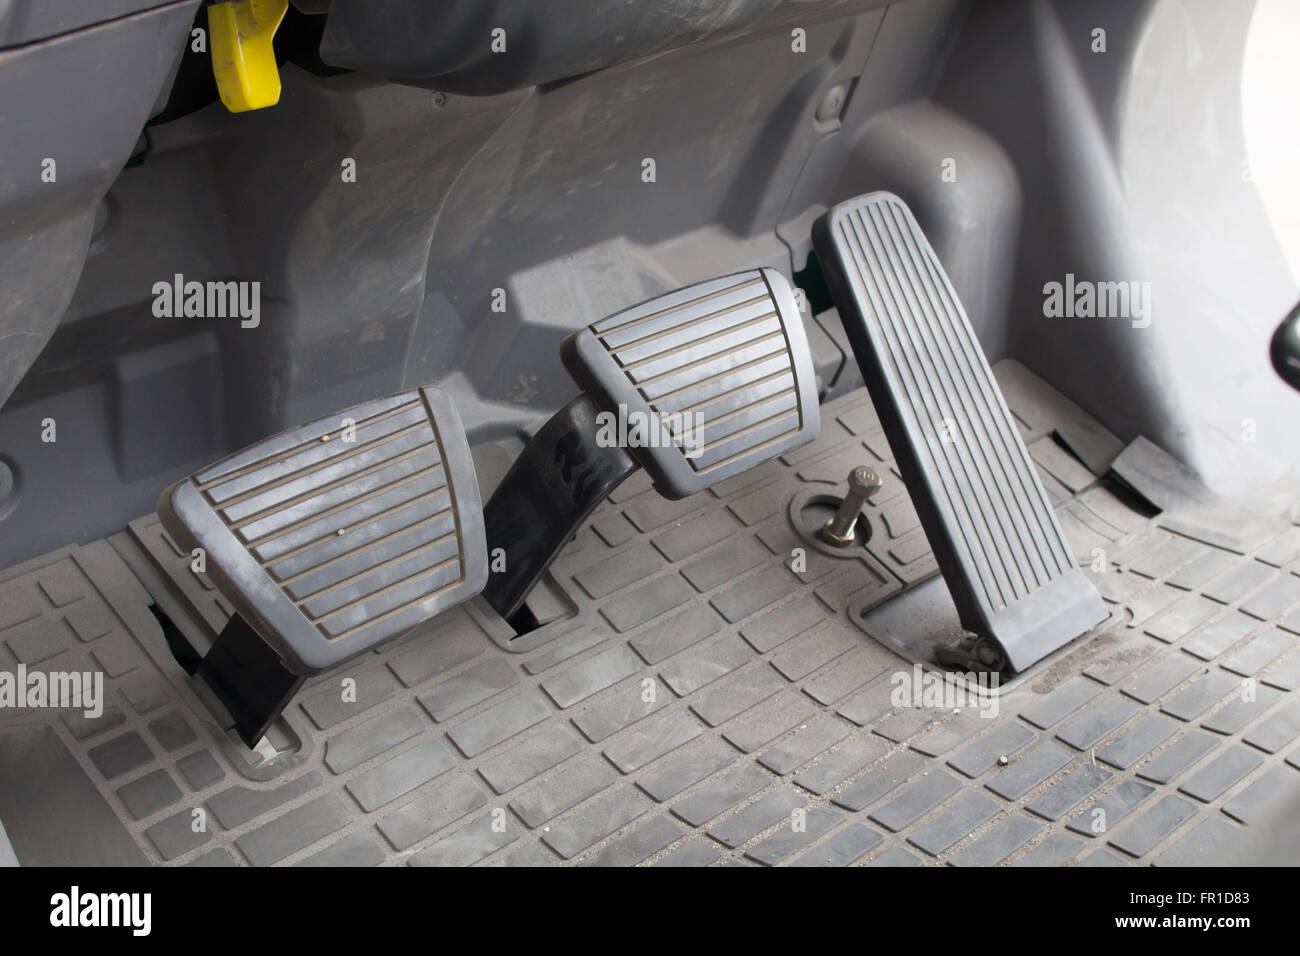 pedal clutch, brake and accelerator Stock Photo - Alamy